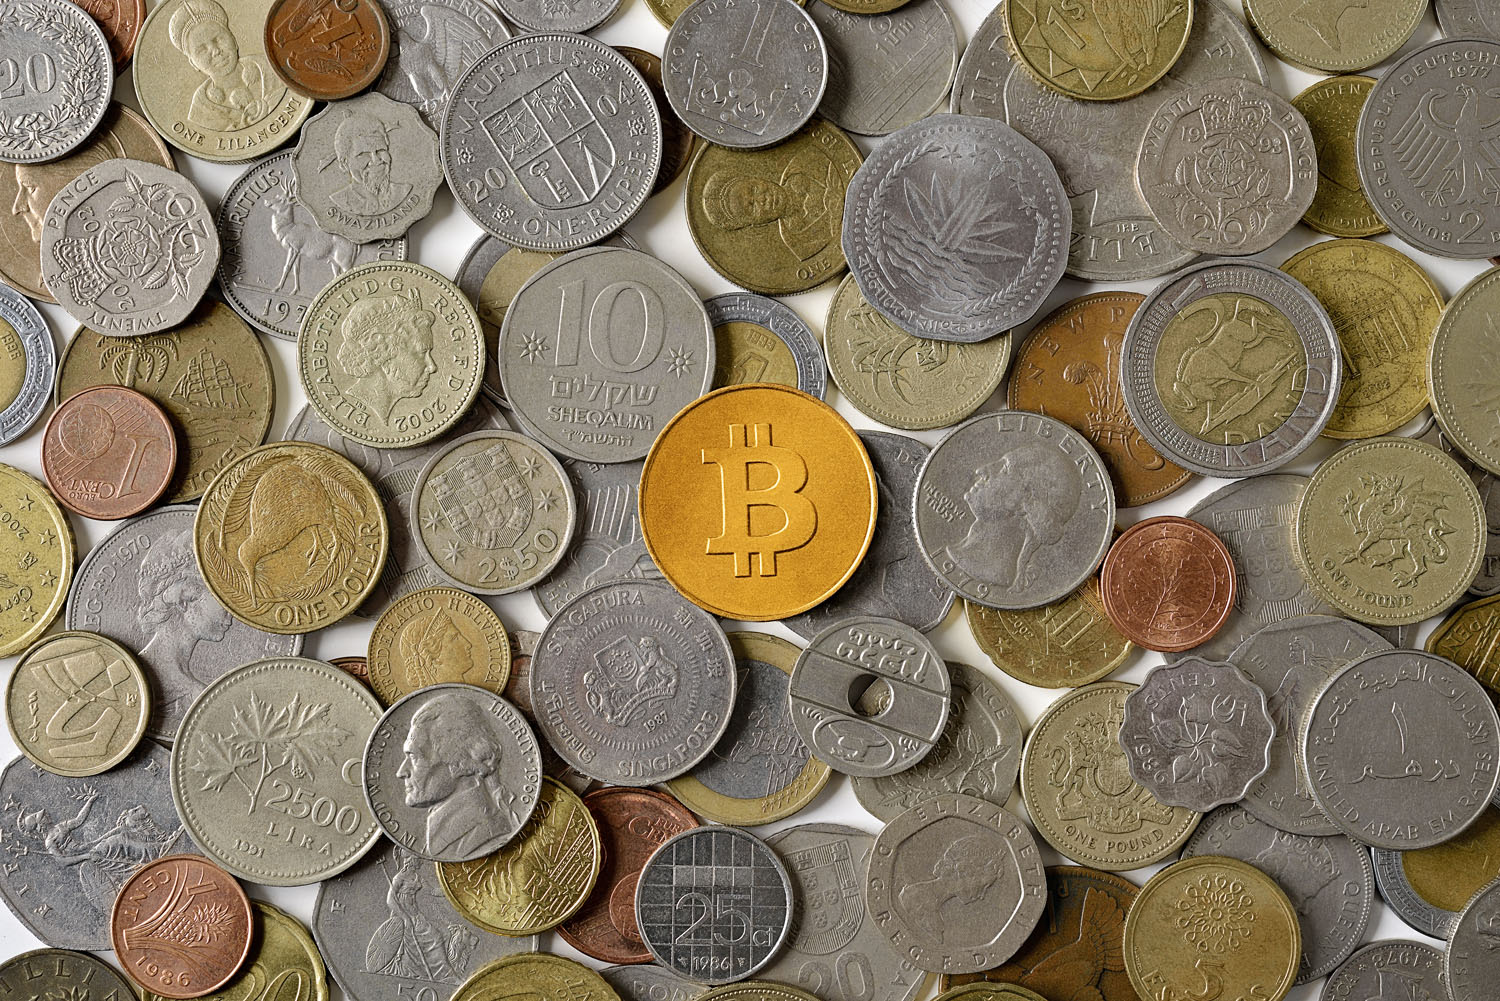 Bitcoin, center, is surrounded by various world coins. (David Malan—Getty Images)